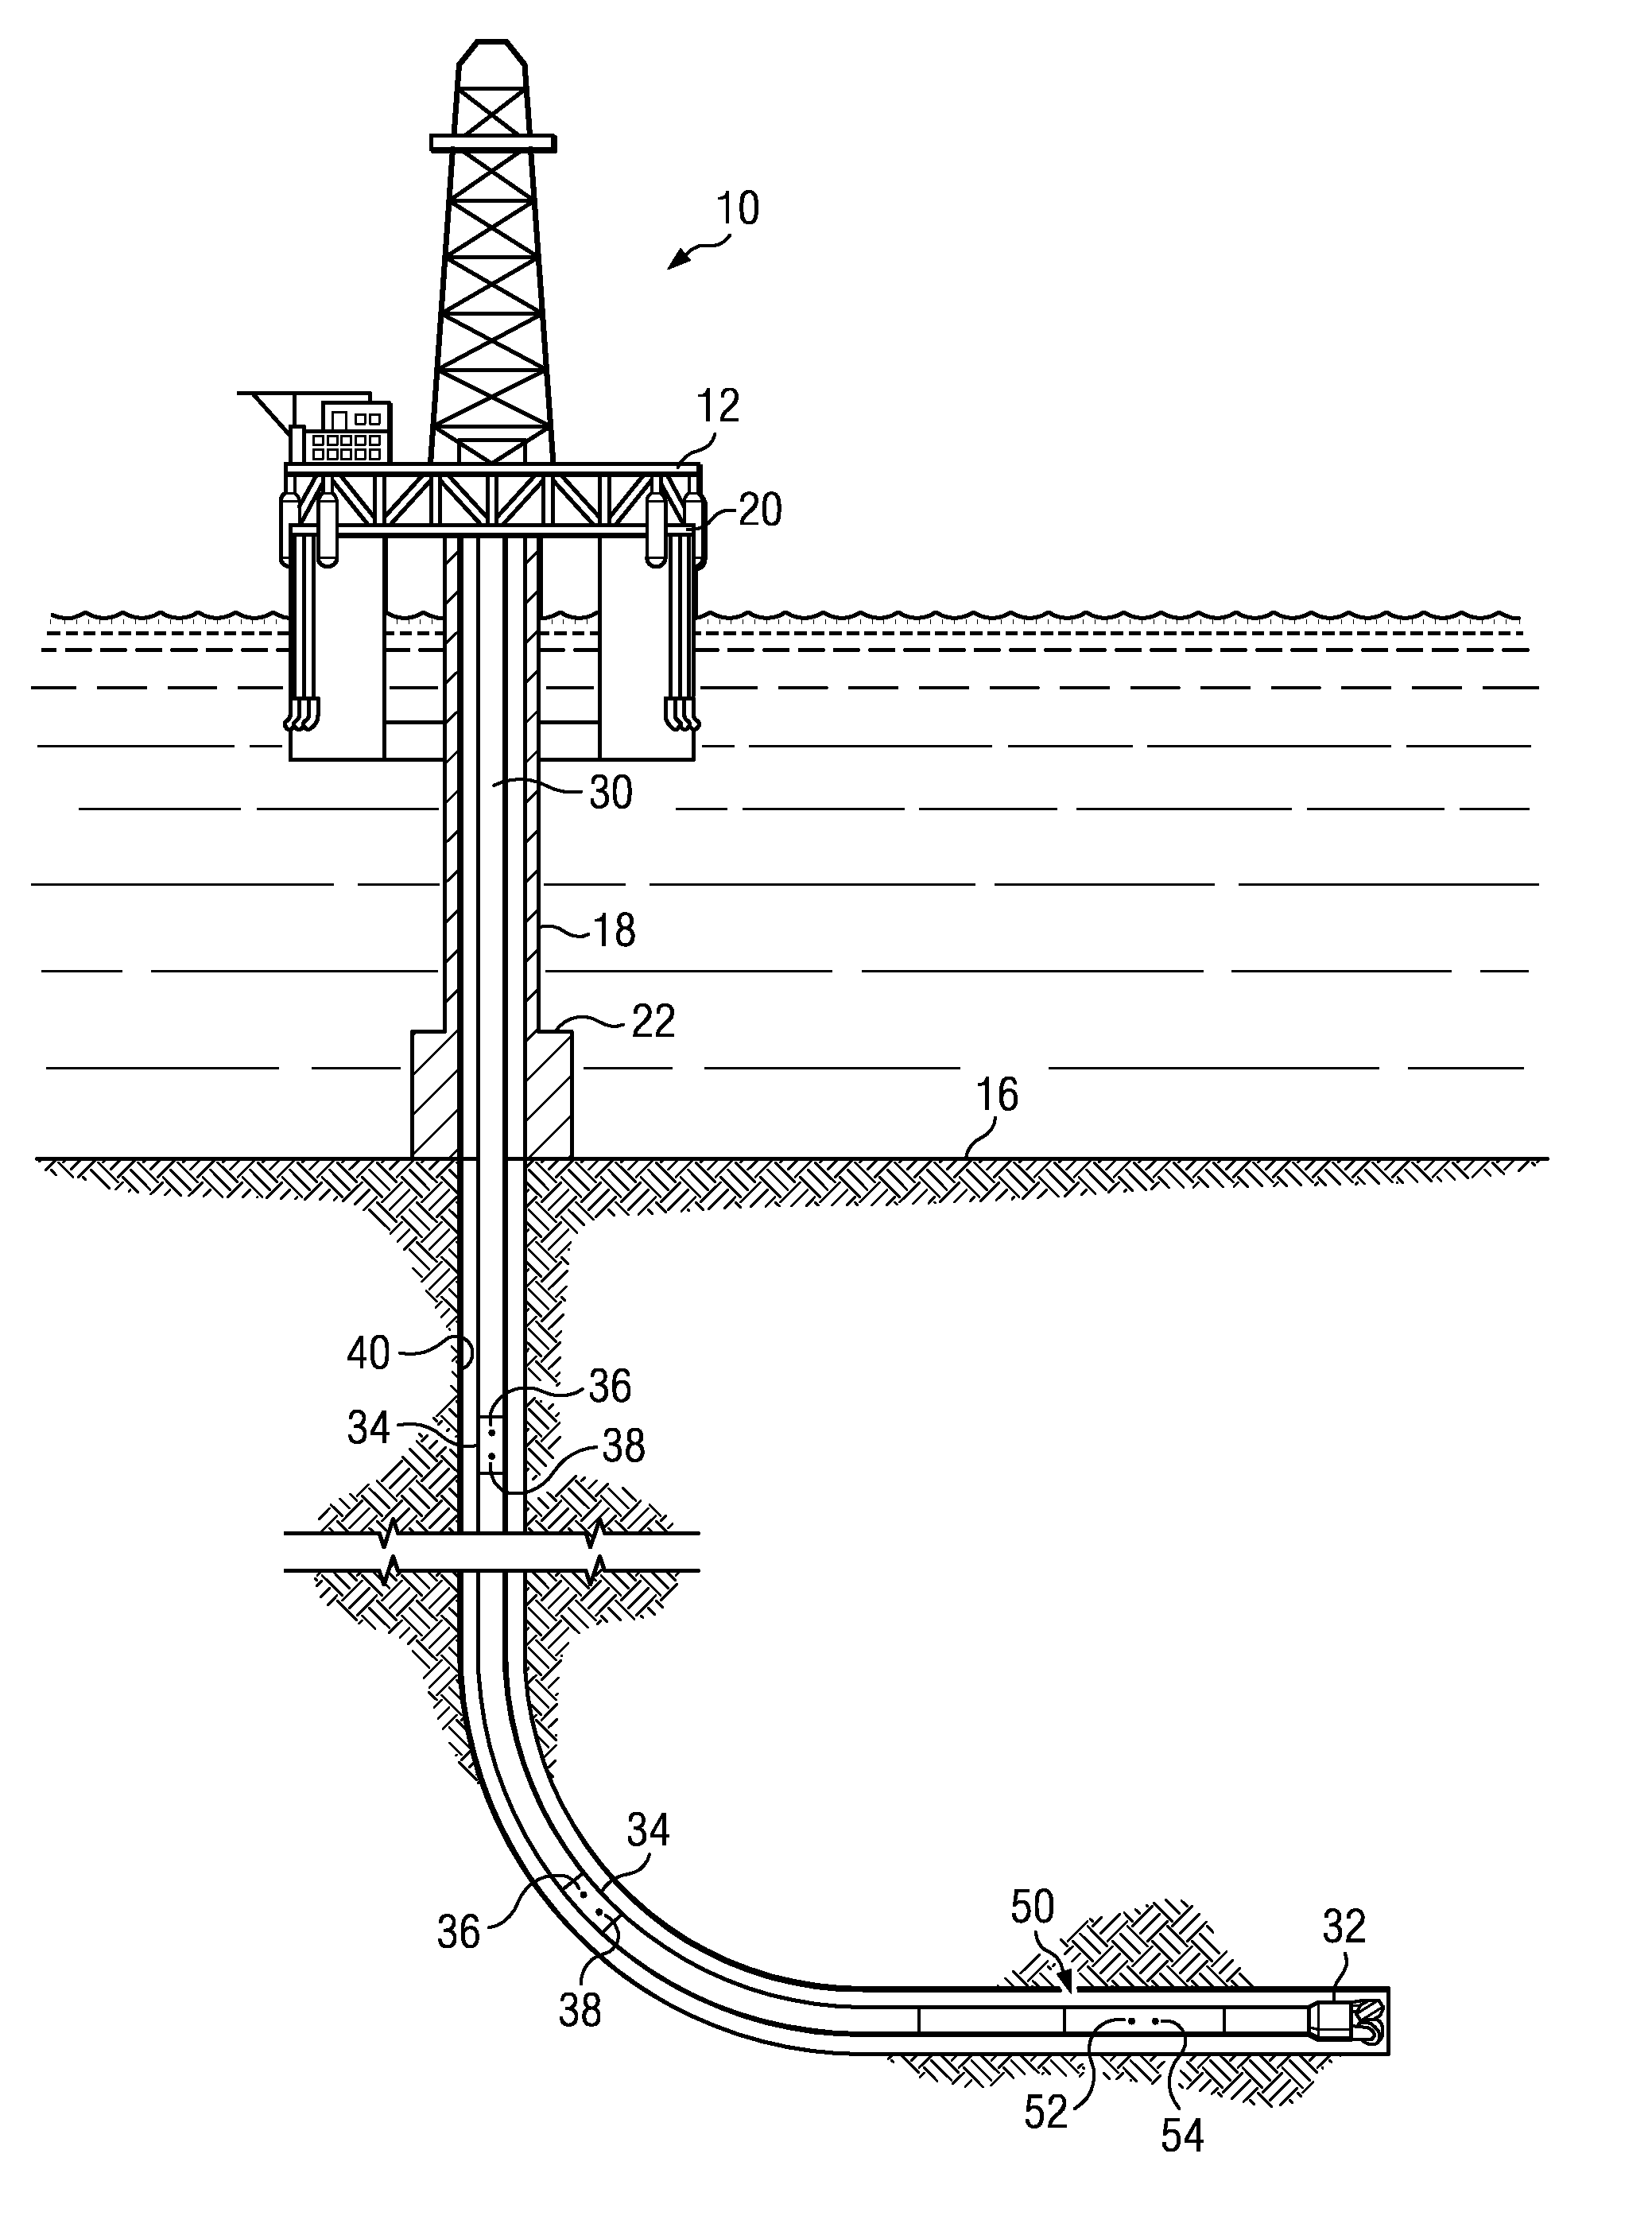 Methods for evaluating borehole volume changes while drilling